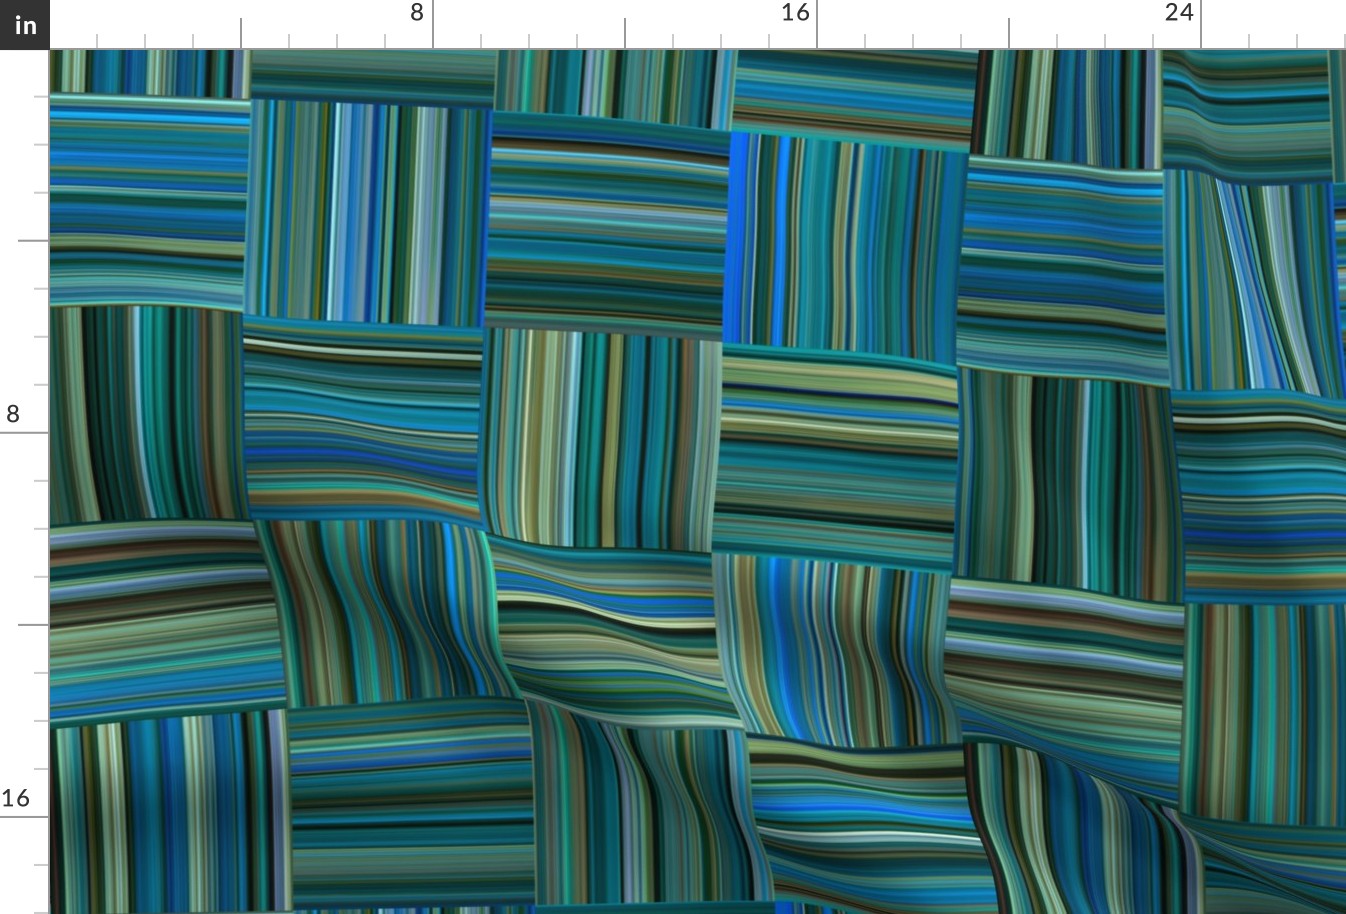 Striped Check Pattern 02 L Turquoise - Multicolored Brushstrokes - Geometric Painted Pattern By 3H-Art Oda - Turquoise, Cyan, Blue, Green And Brown Color Shades - Blended Colors - Modern Seamless Pattern